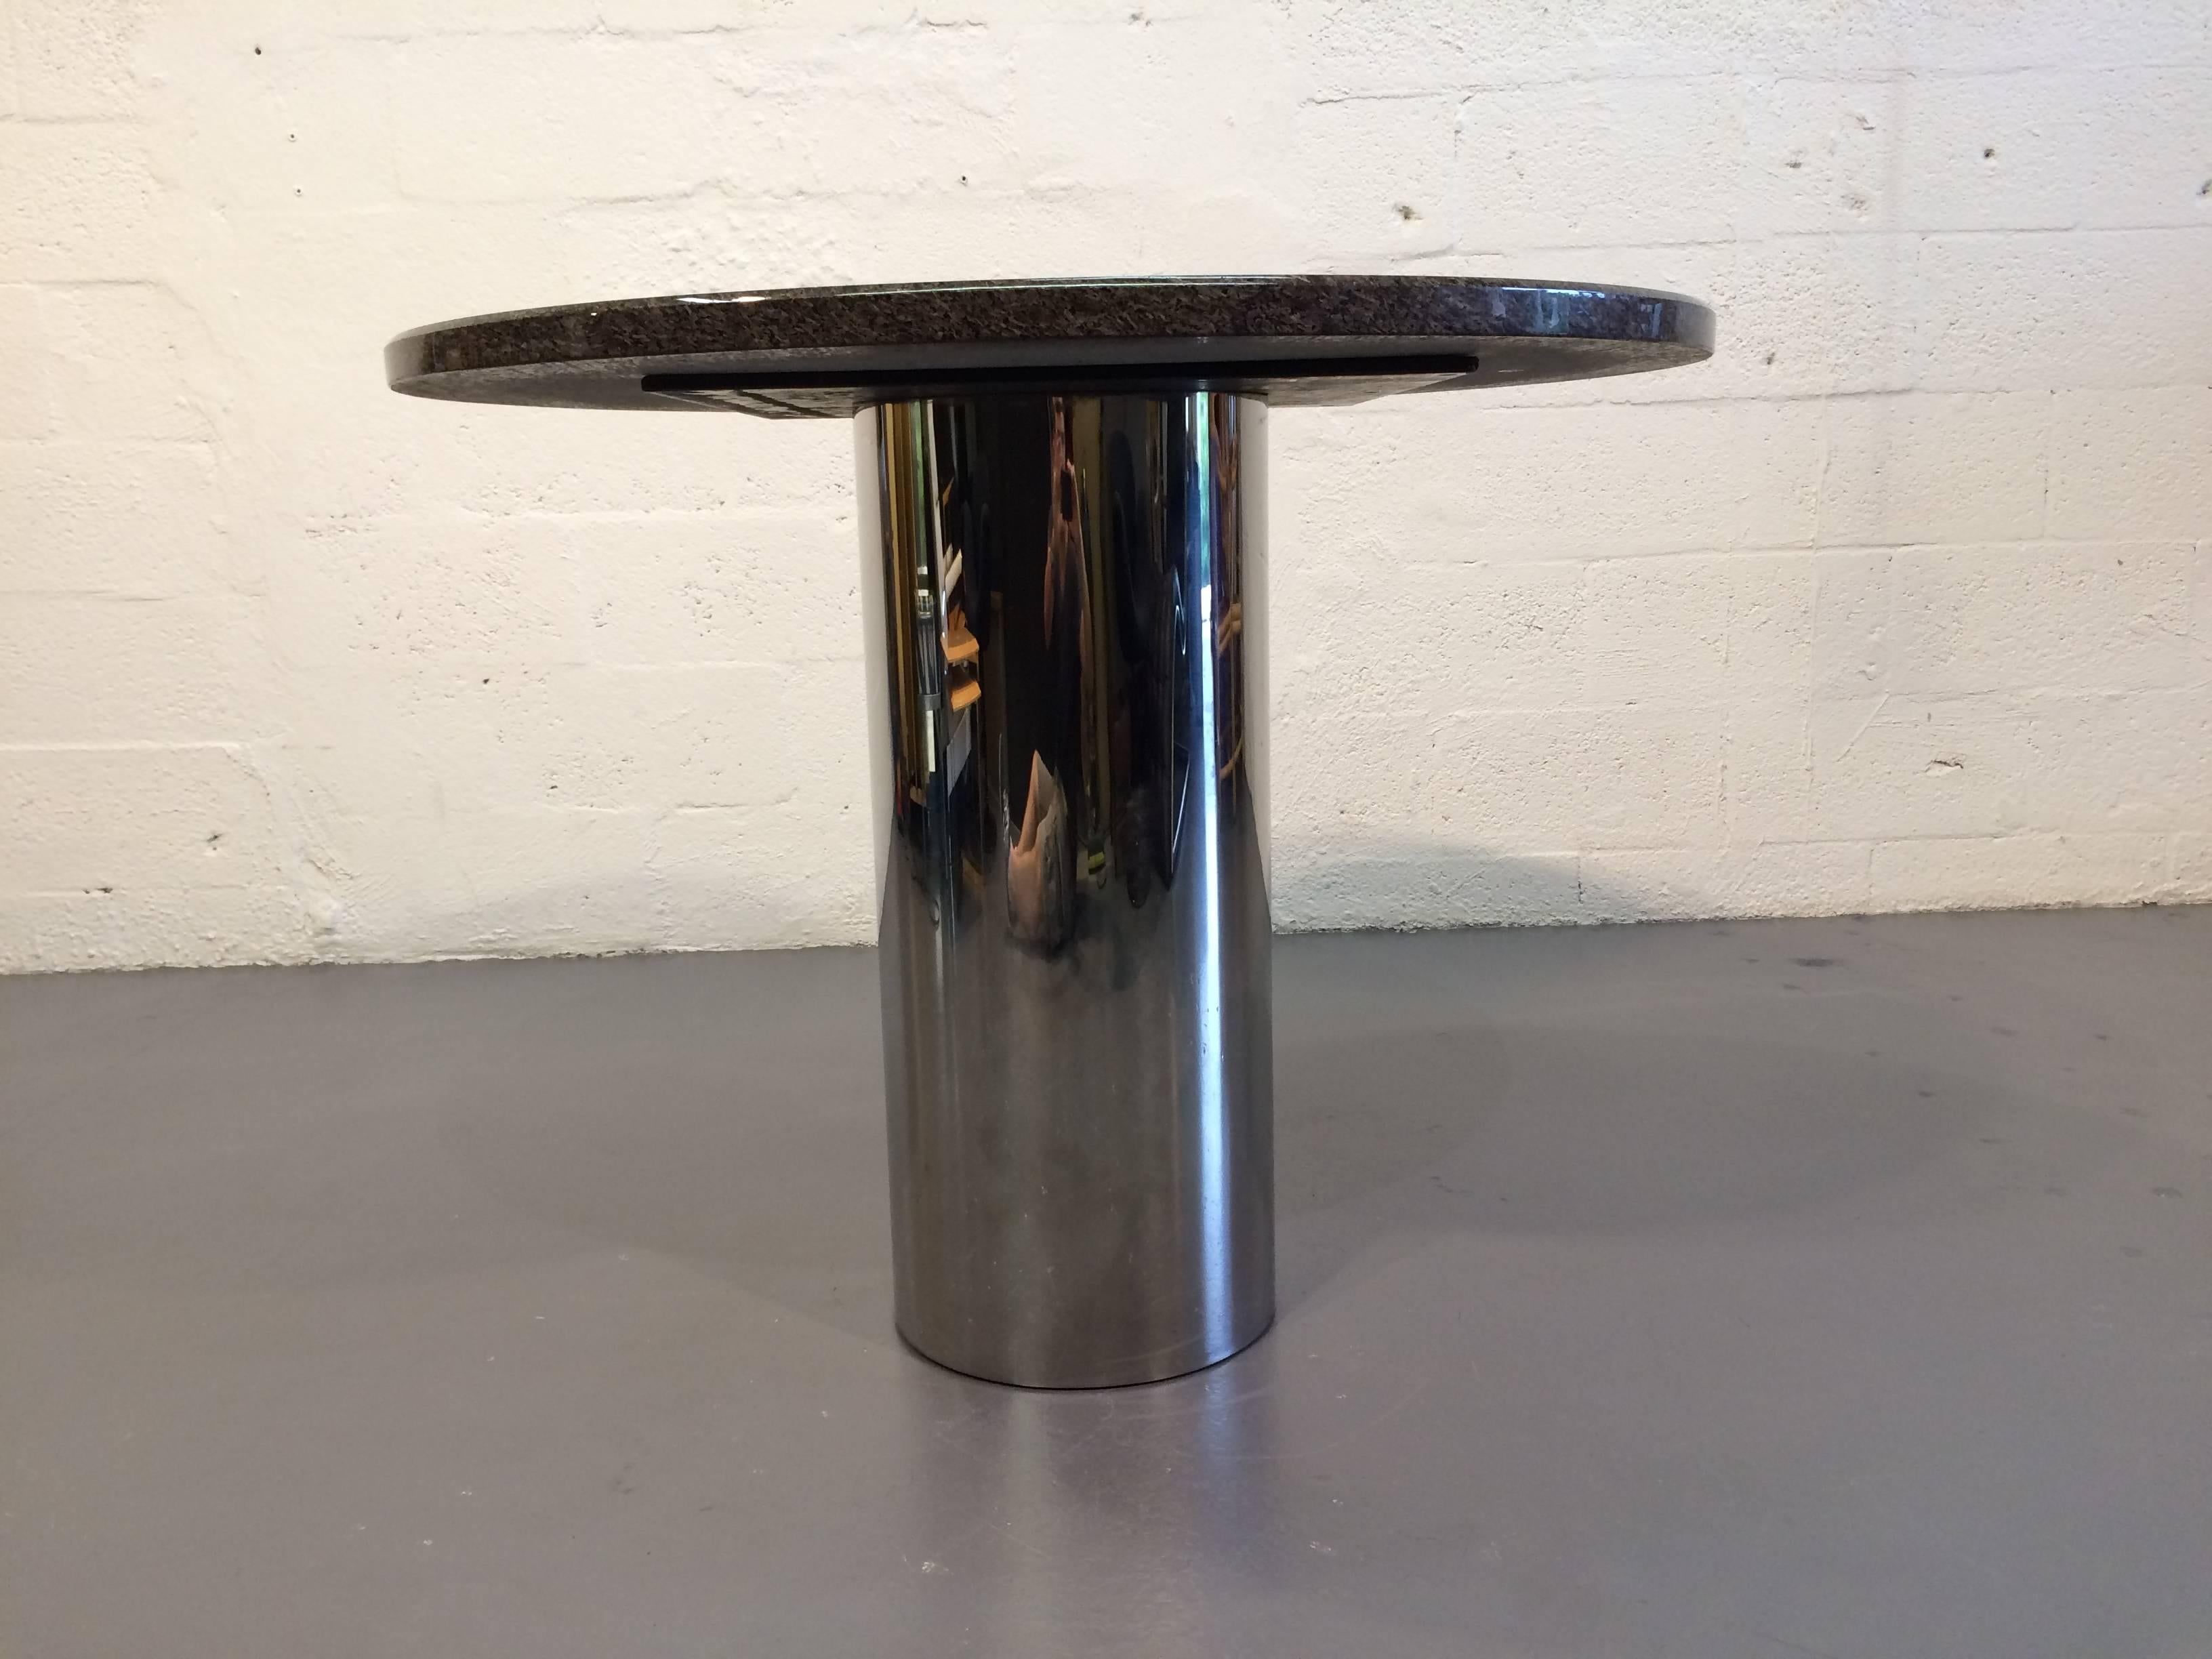 Stainless Steel and Granite Centre Table or Dining Table In Good Condition For Sale In Miami, FL